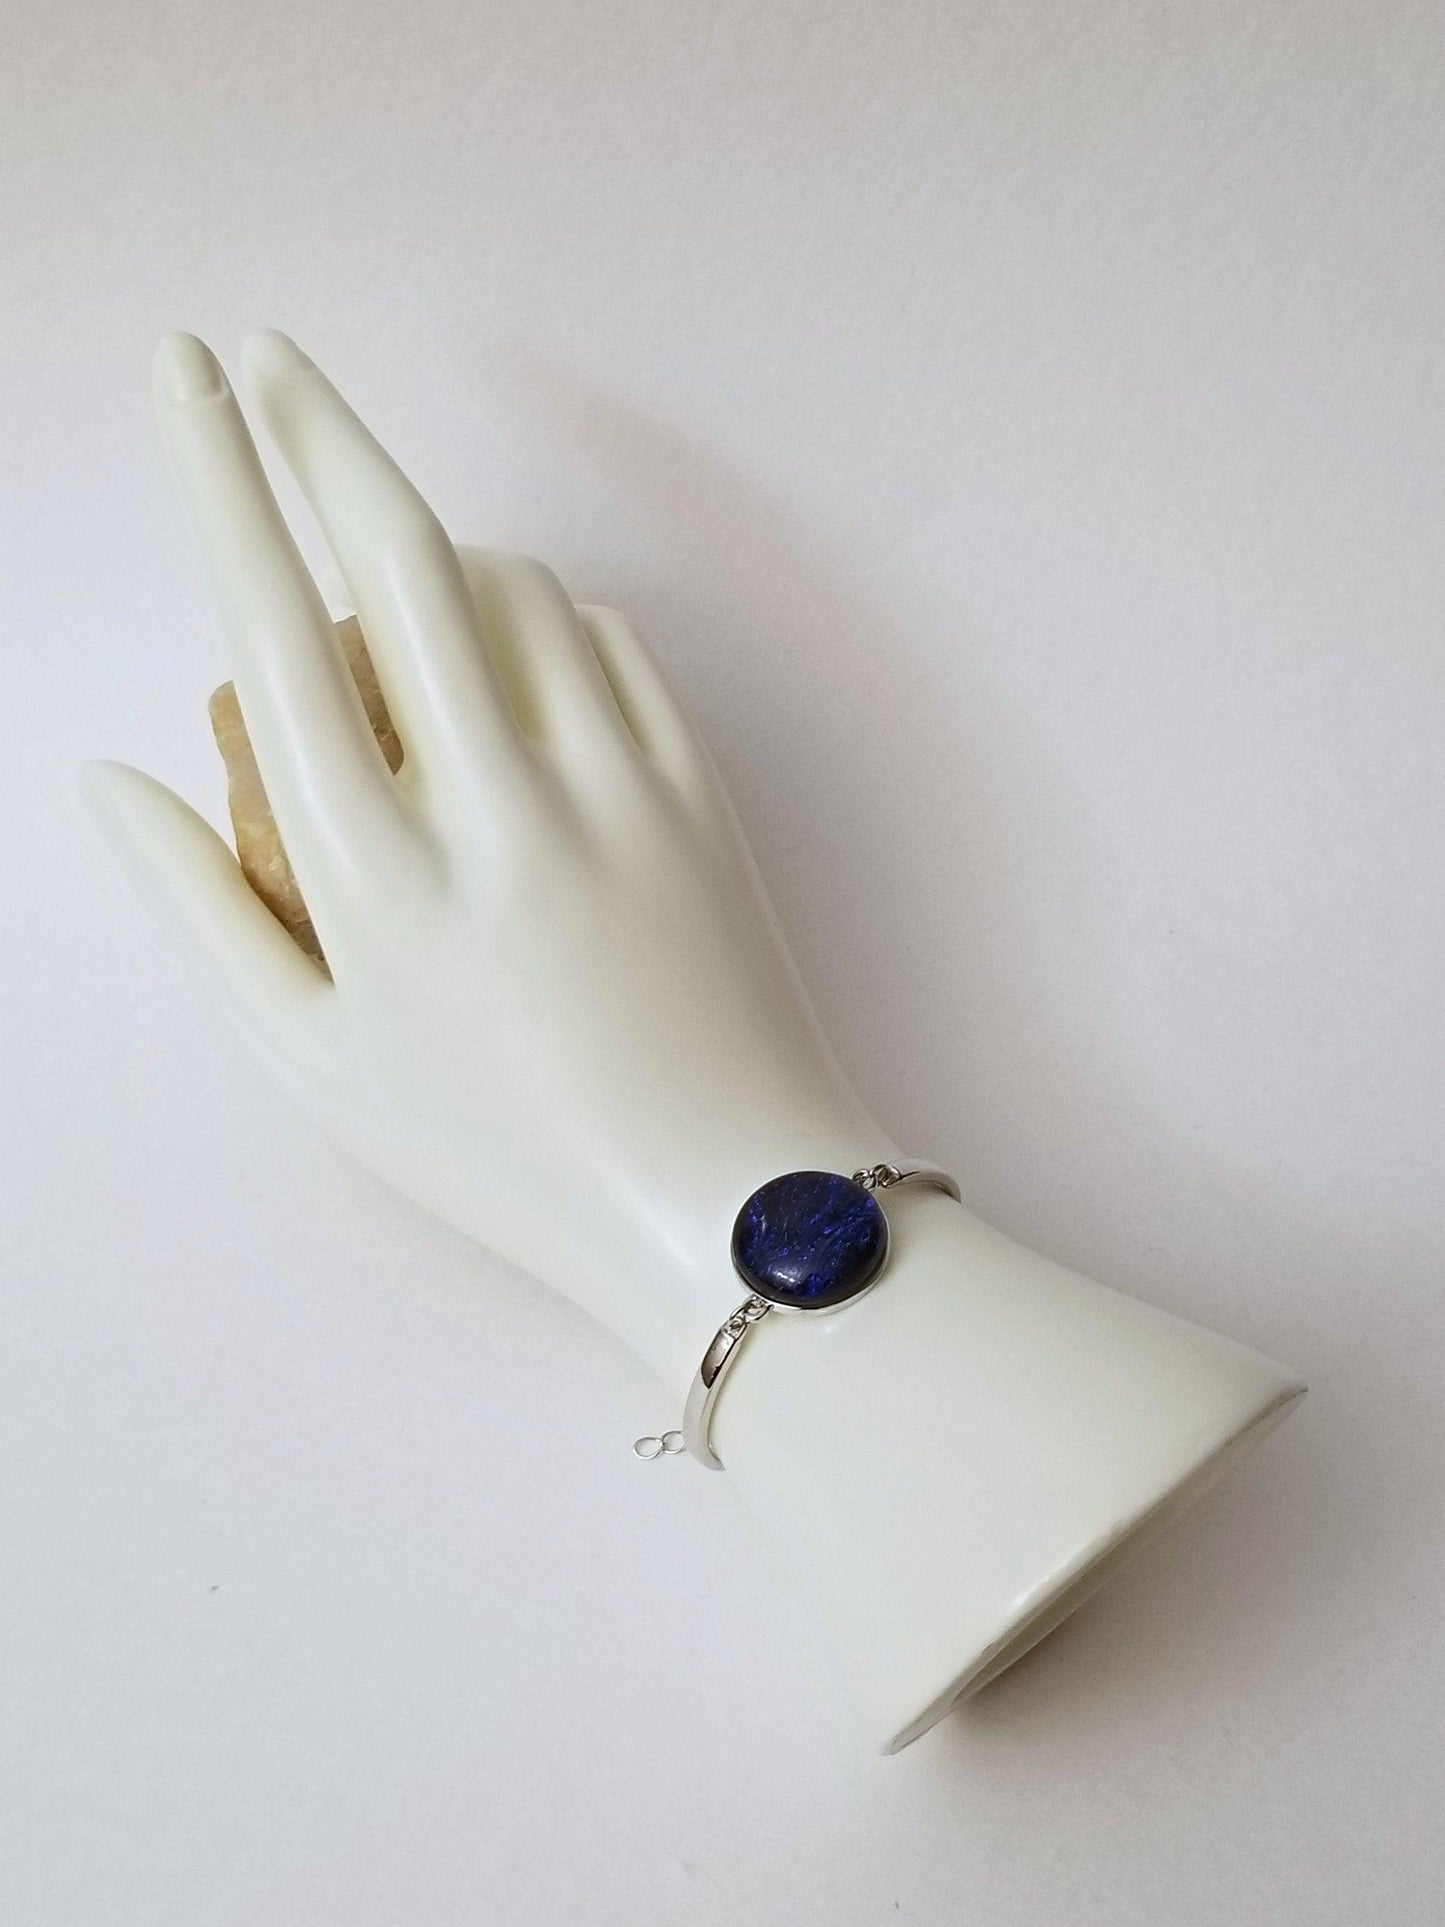 Delicate Adjustable Bracelet,  silver tone with Dichroic  Blue  wave  fused glass cabochon